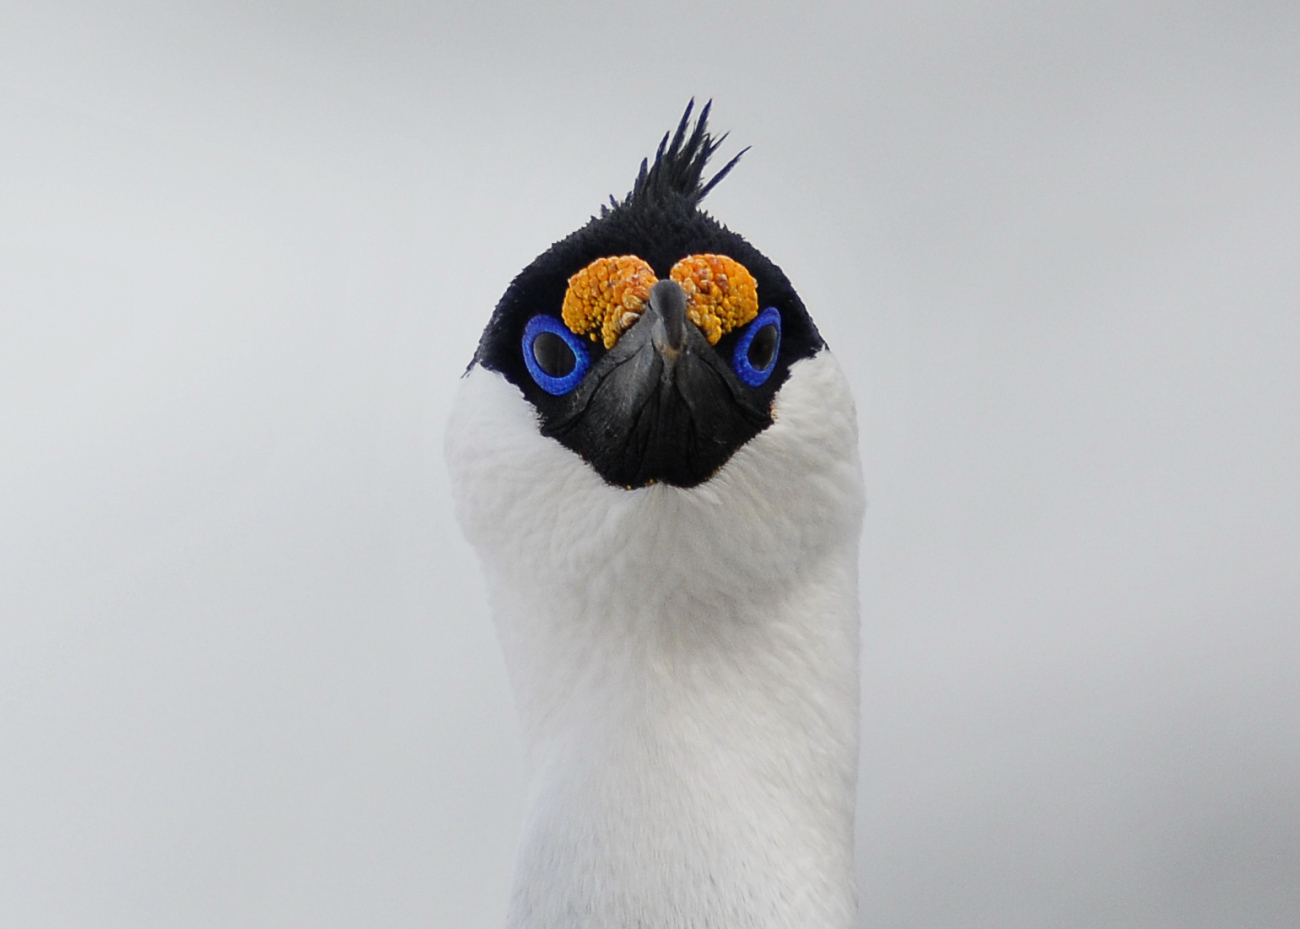 A close-up of this Antarctic shag highlights its characteristic blue and theyellow/orange growth above its beak that is brightest during the breedingseason, presumably to attract mates